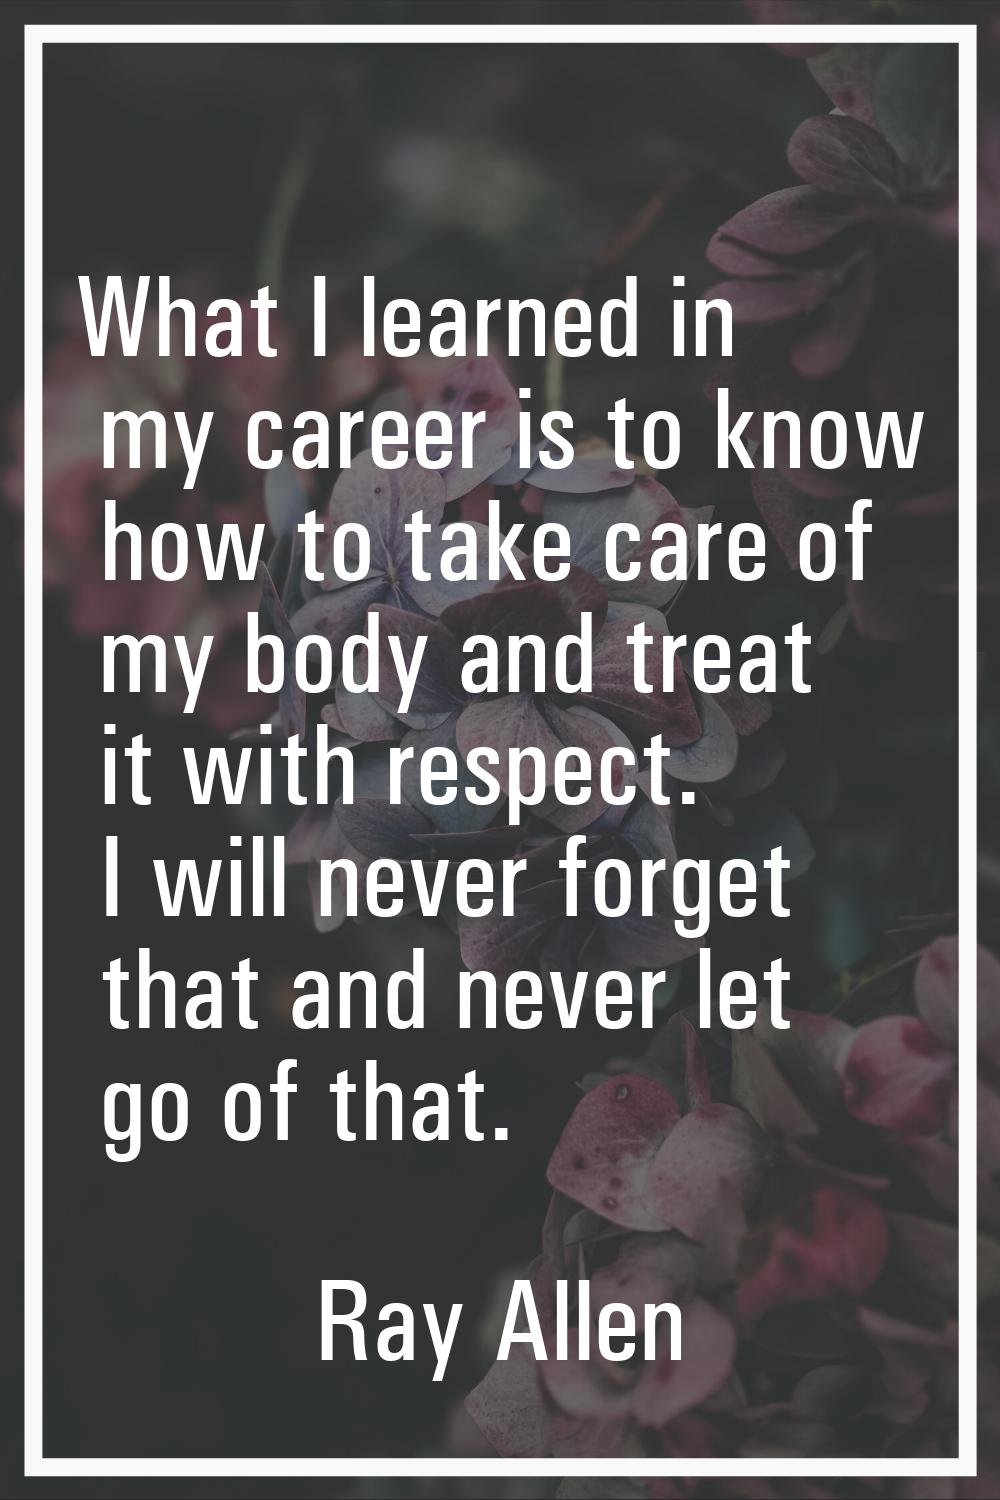 What I learned in my career is to know how to take care of my body and treat it with respect. I wil